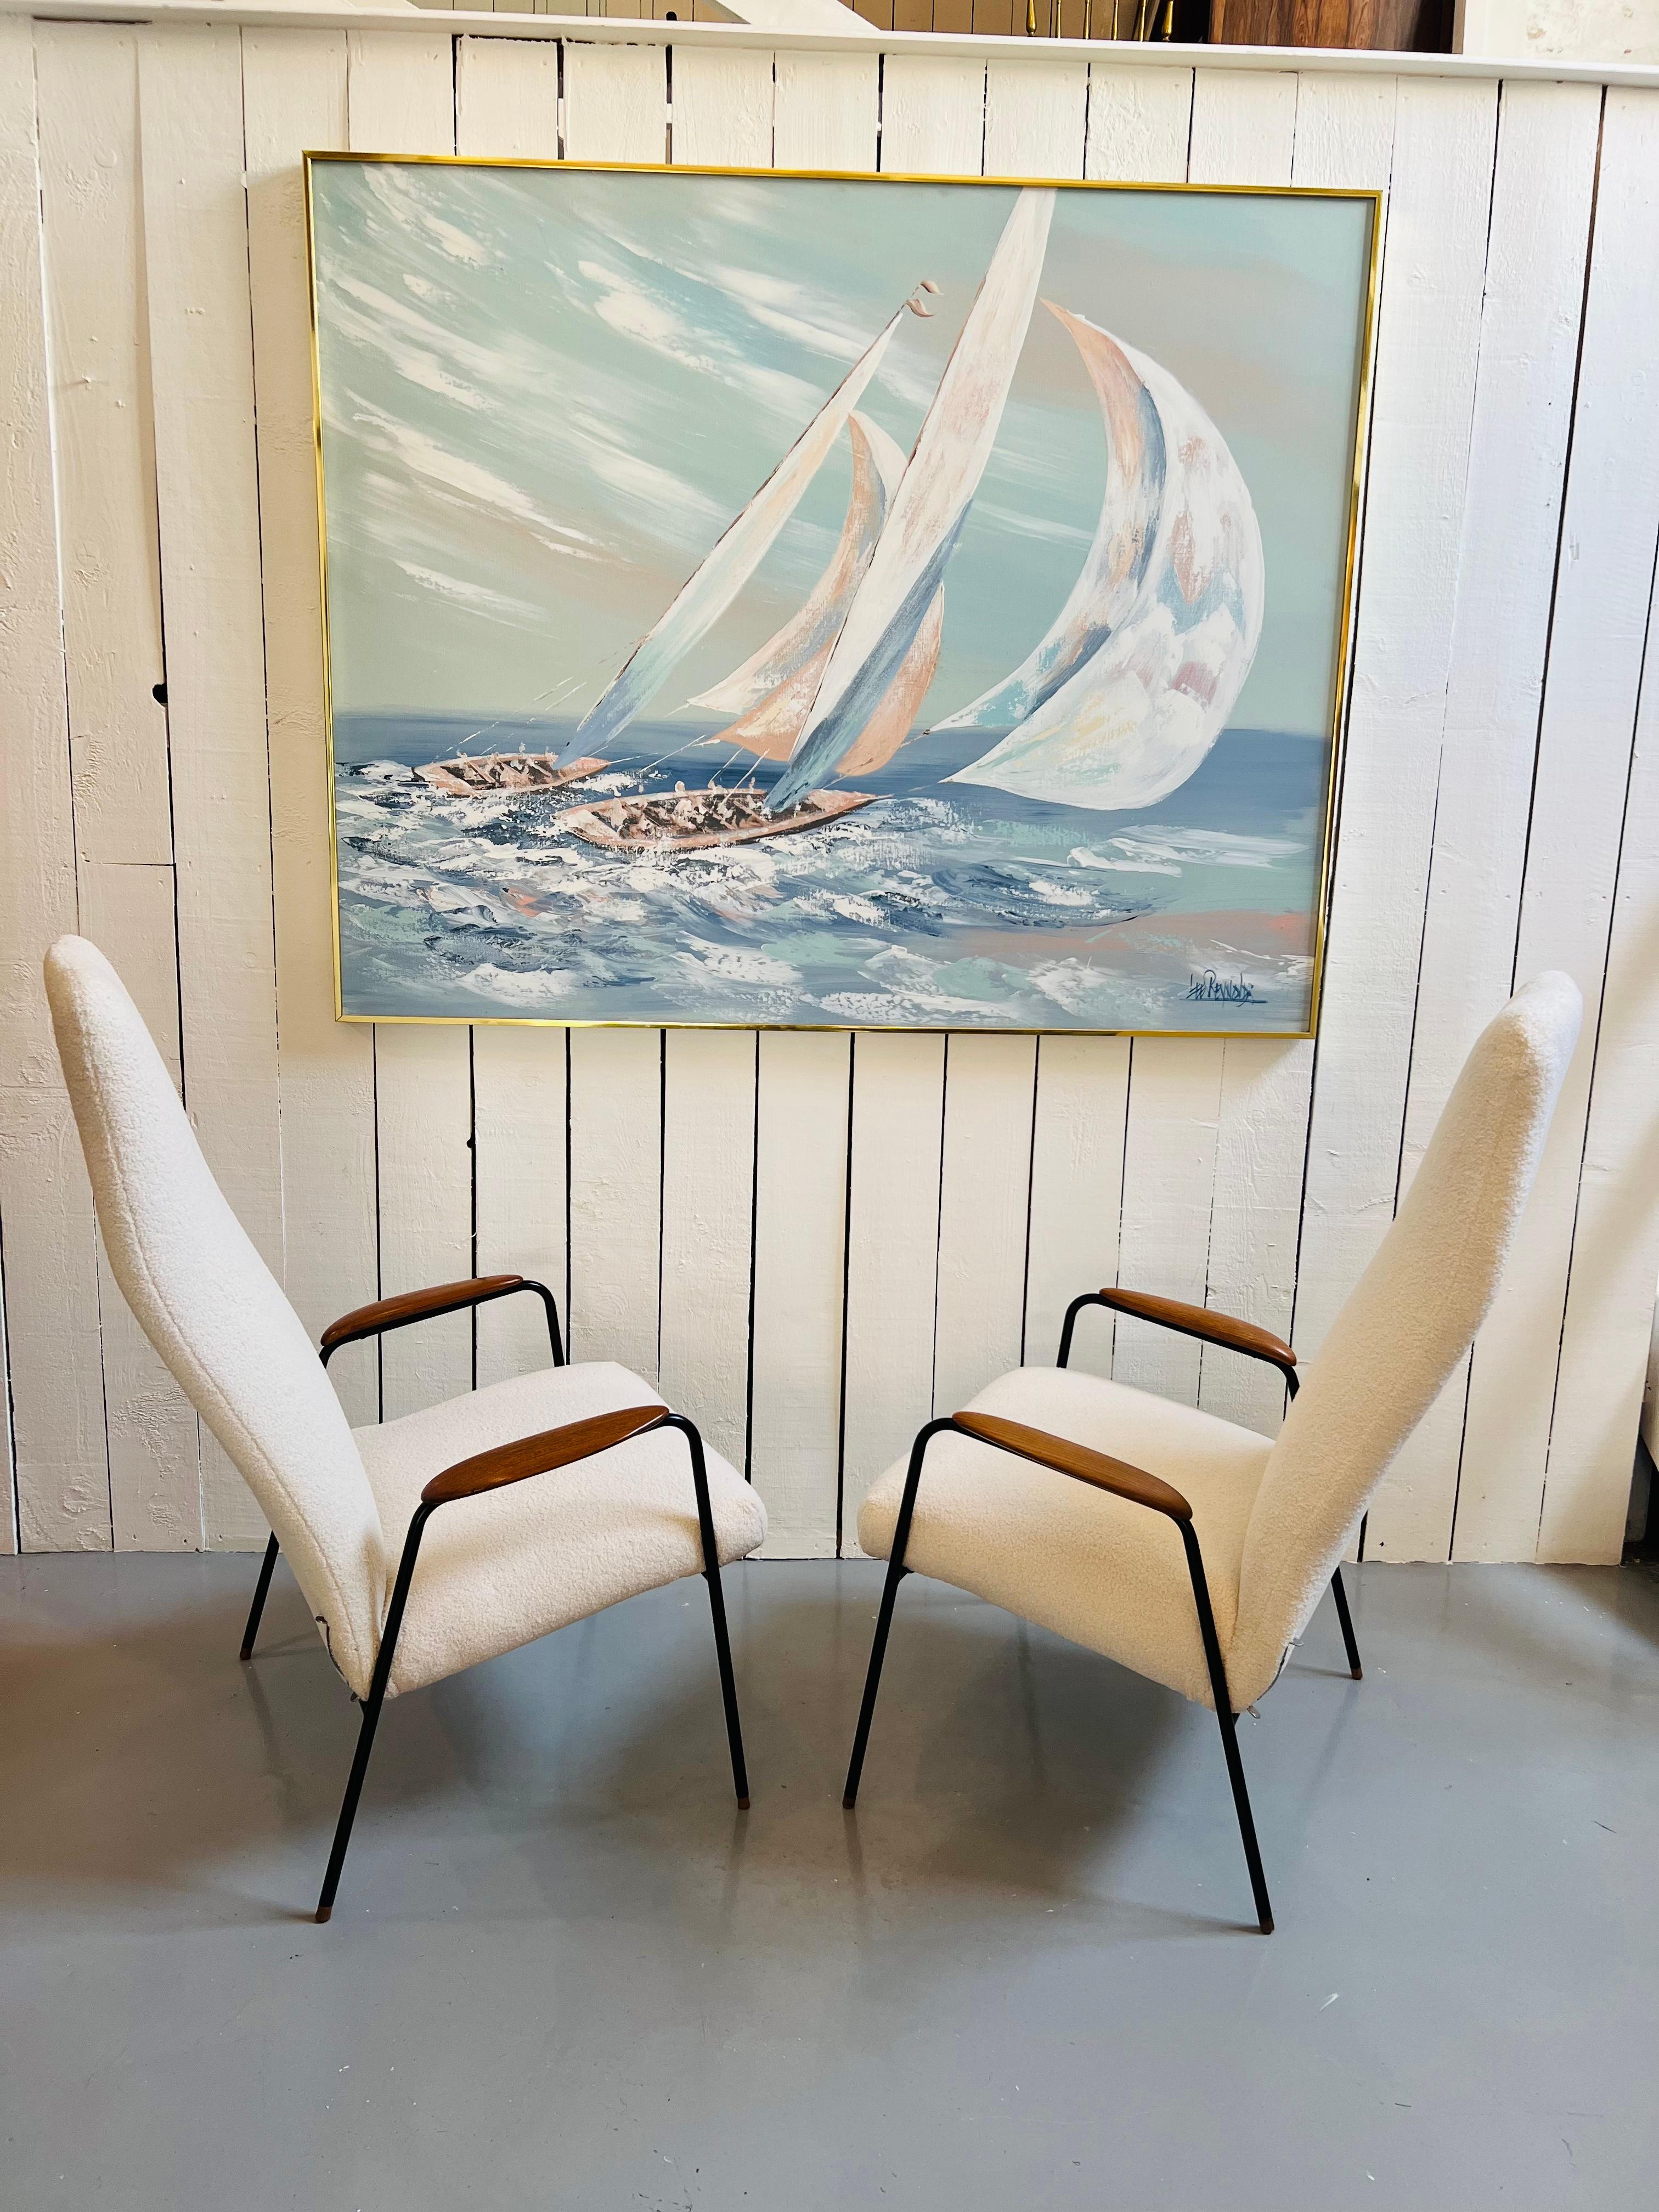 A Stunning pair of chairs rarely available.
Stunning simple design with metal frame terminating on small wooden wooden inserts.